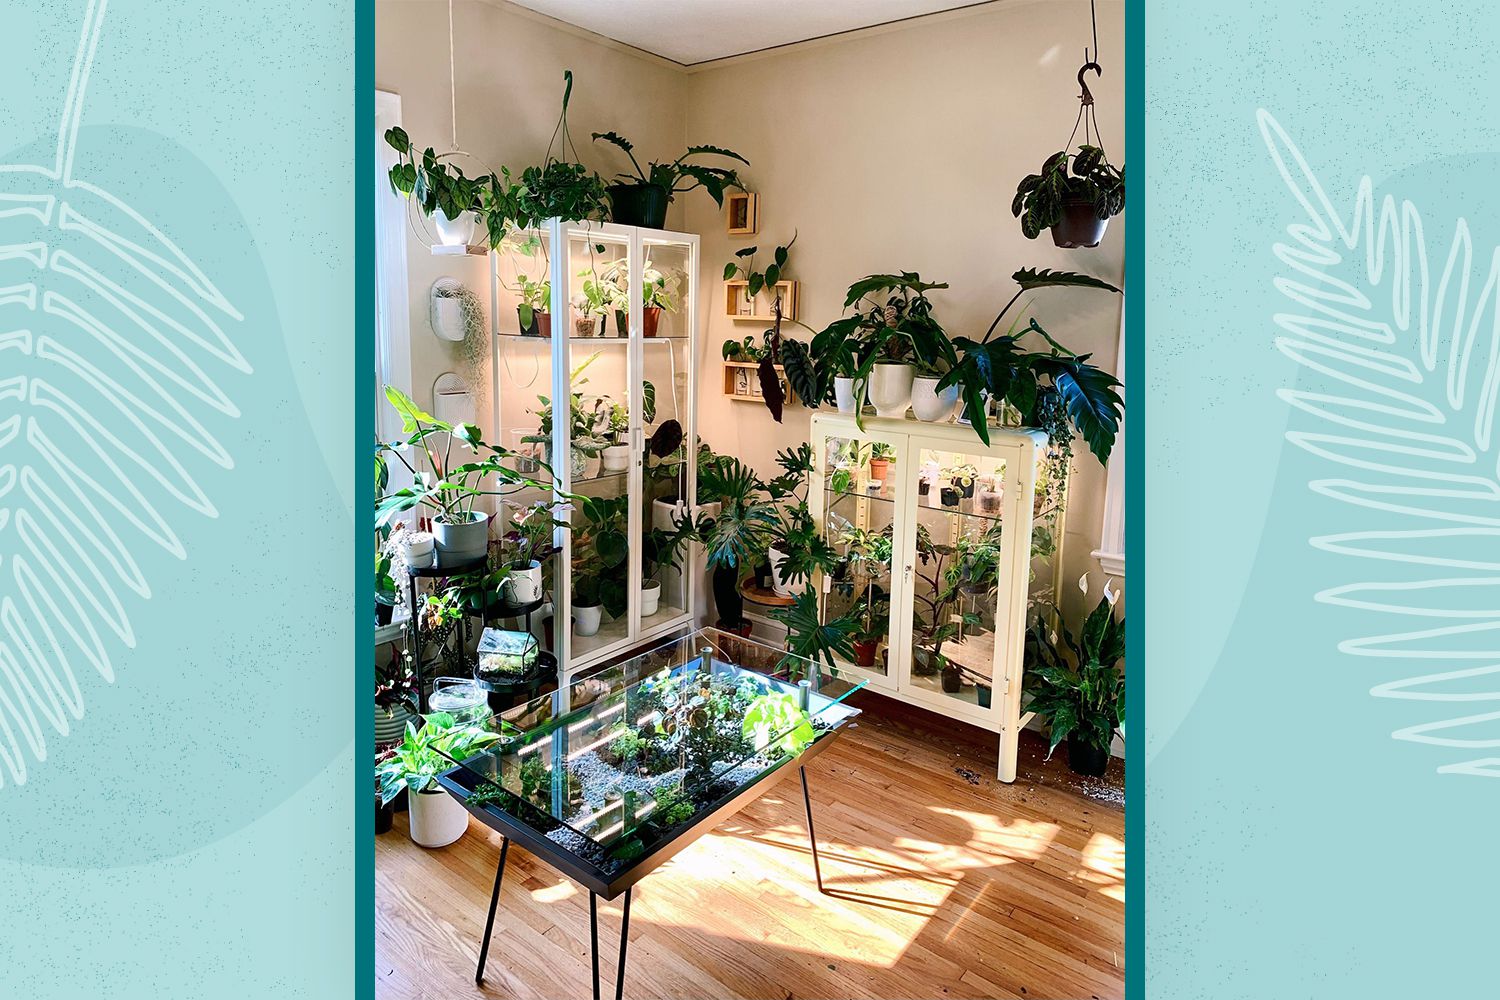 What You Need to Know About Making a Plant Room